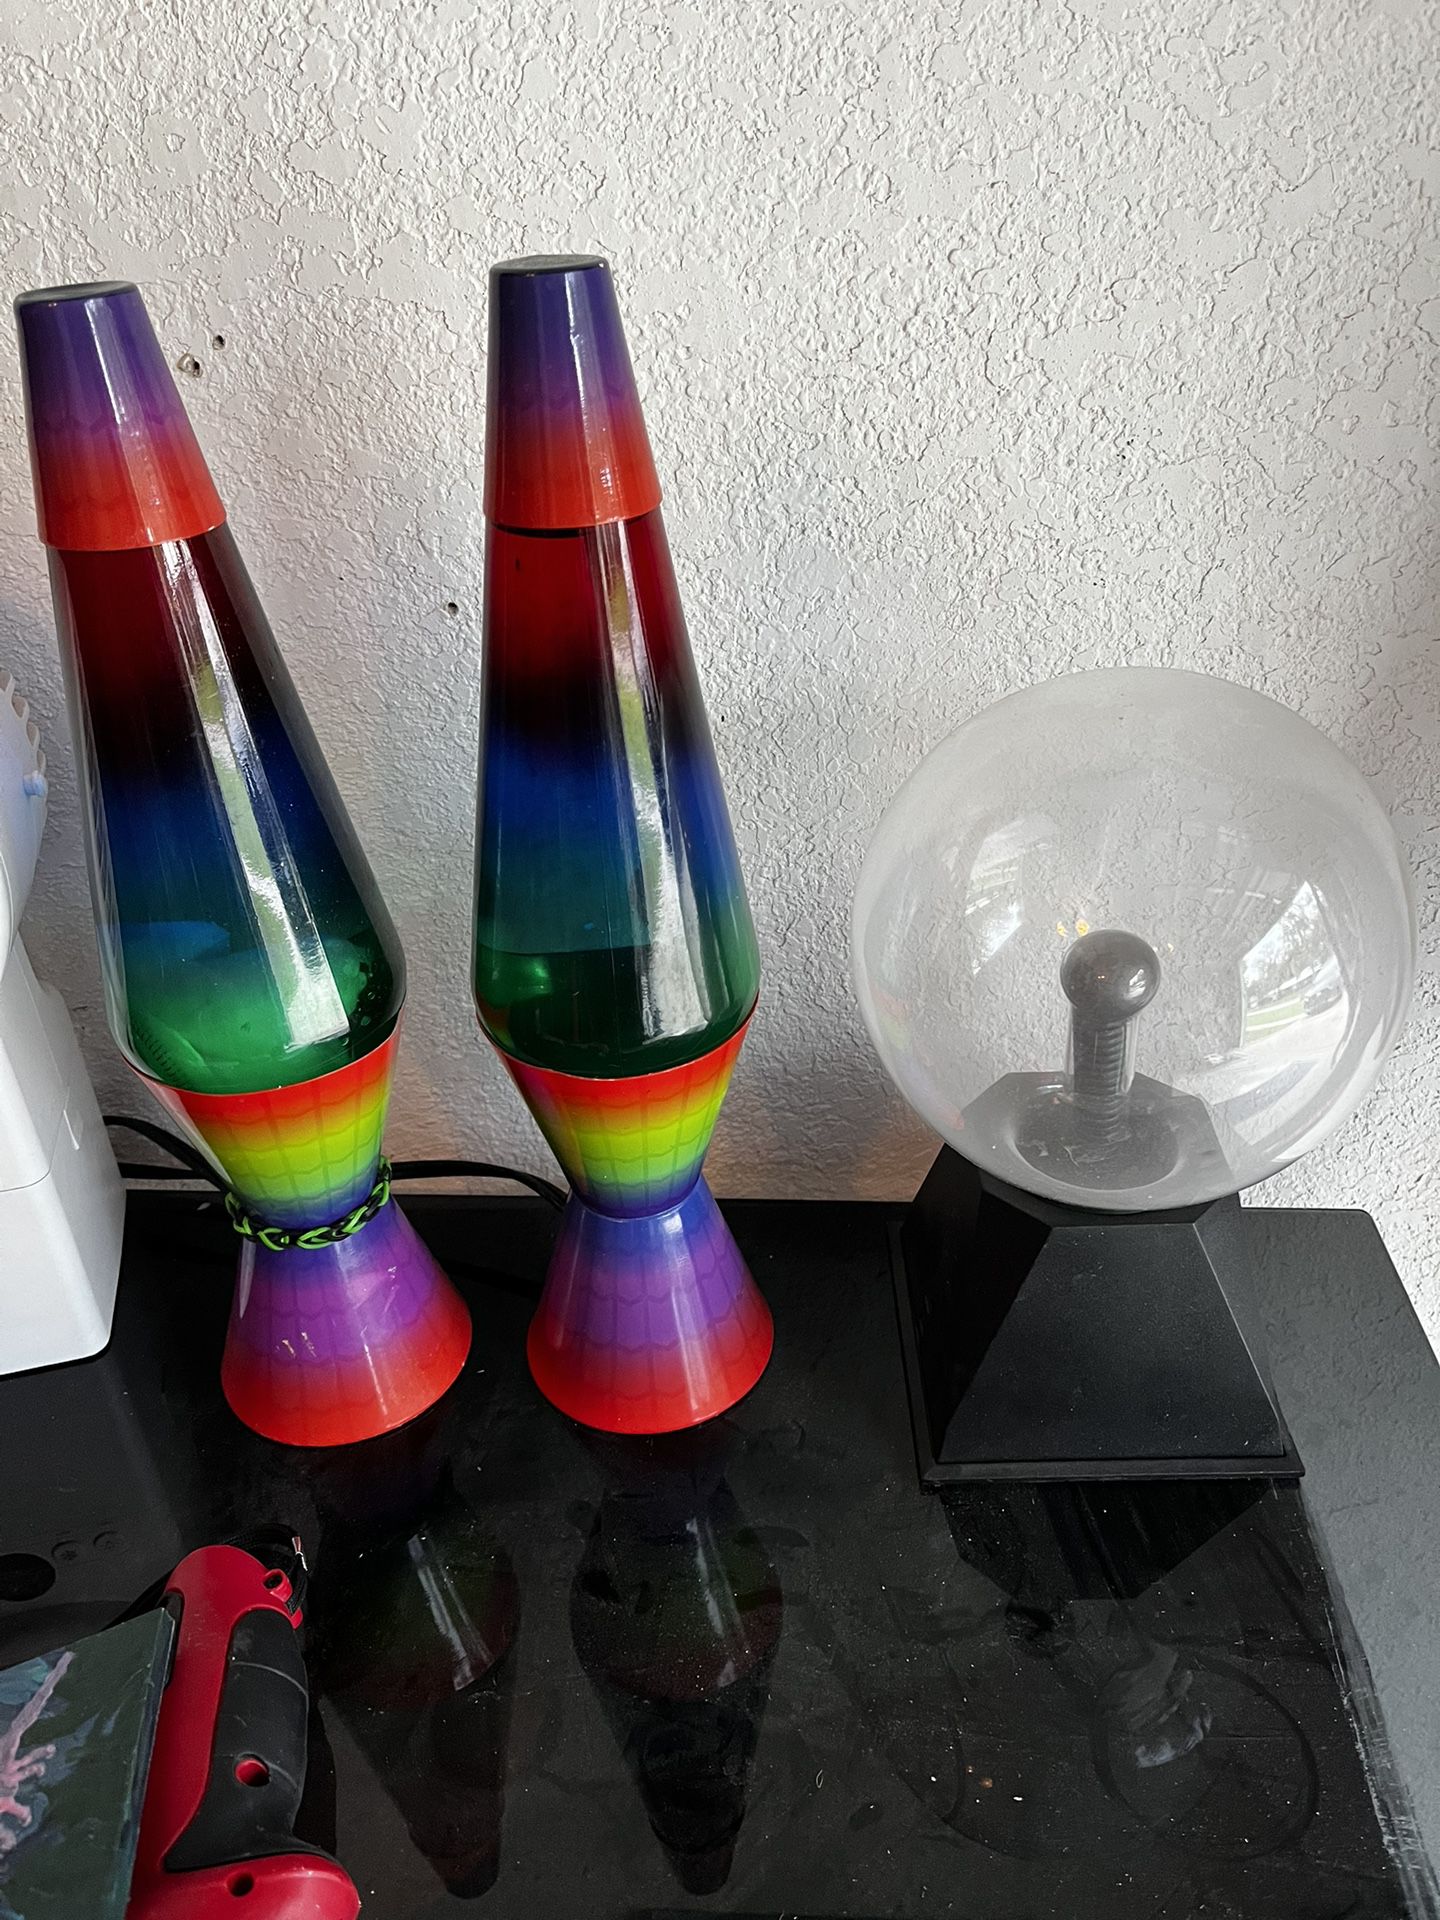 Lava Lamps And Static Display